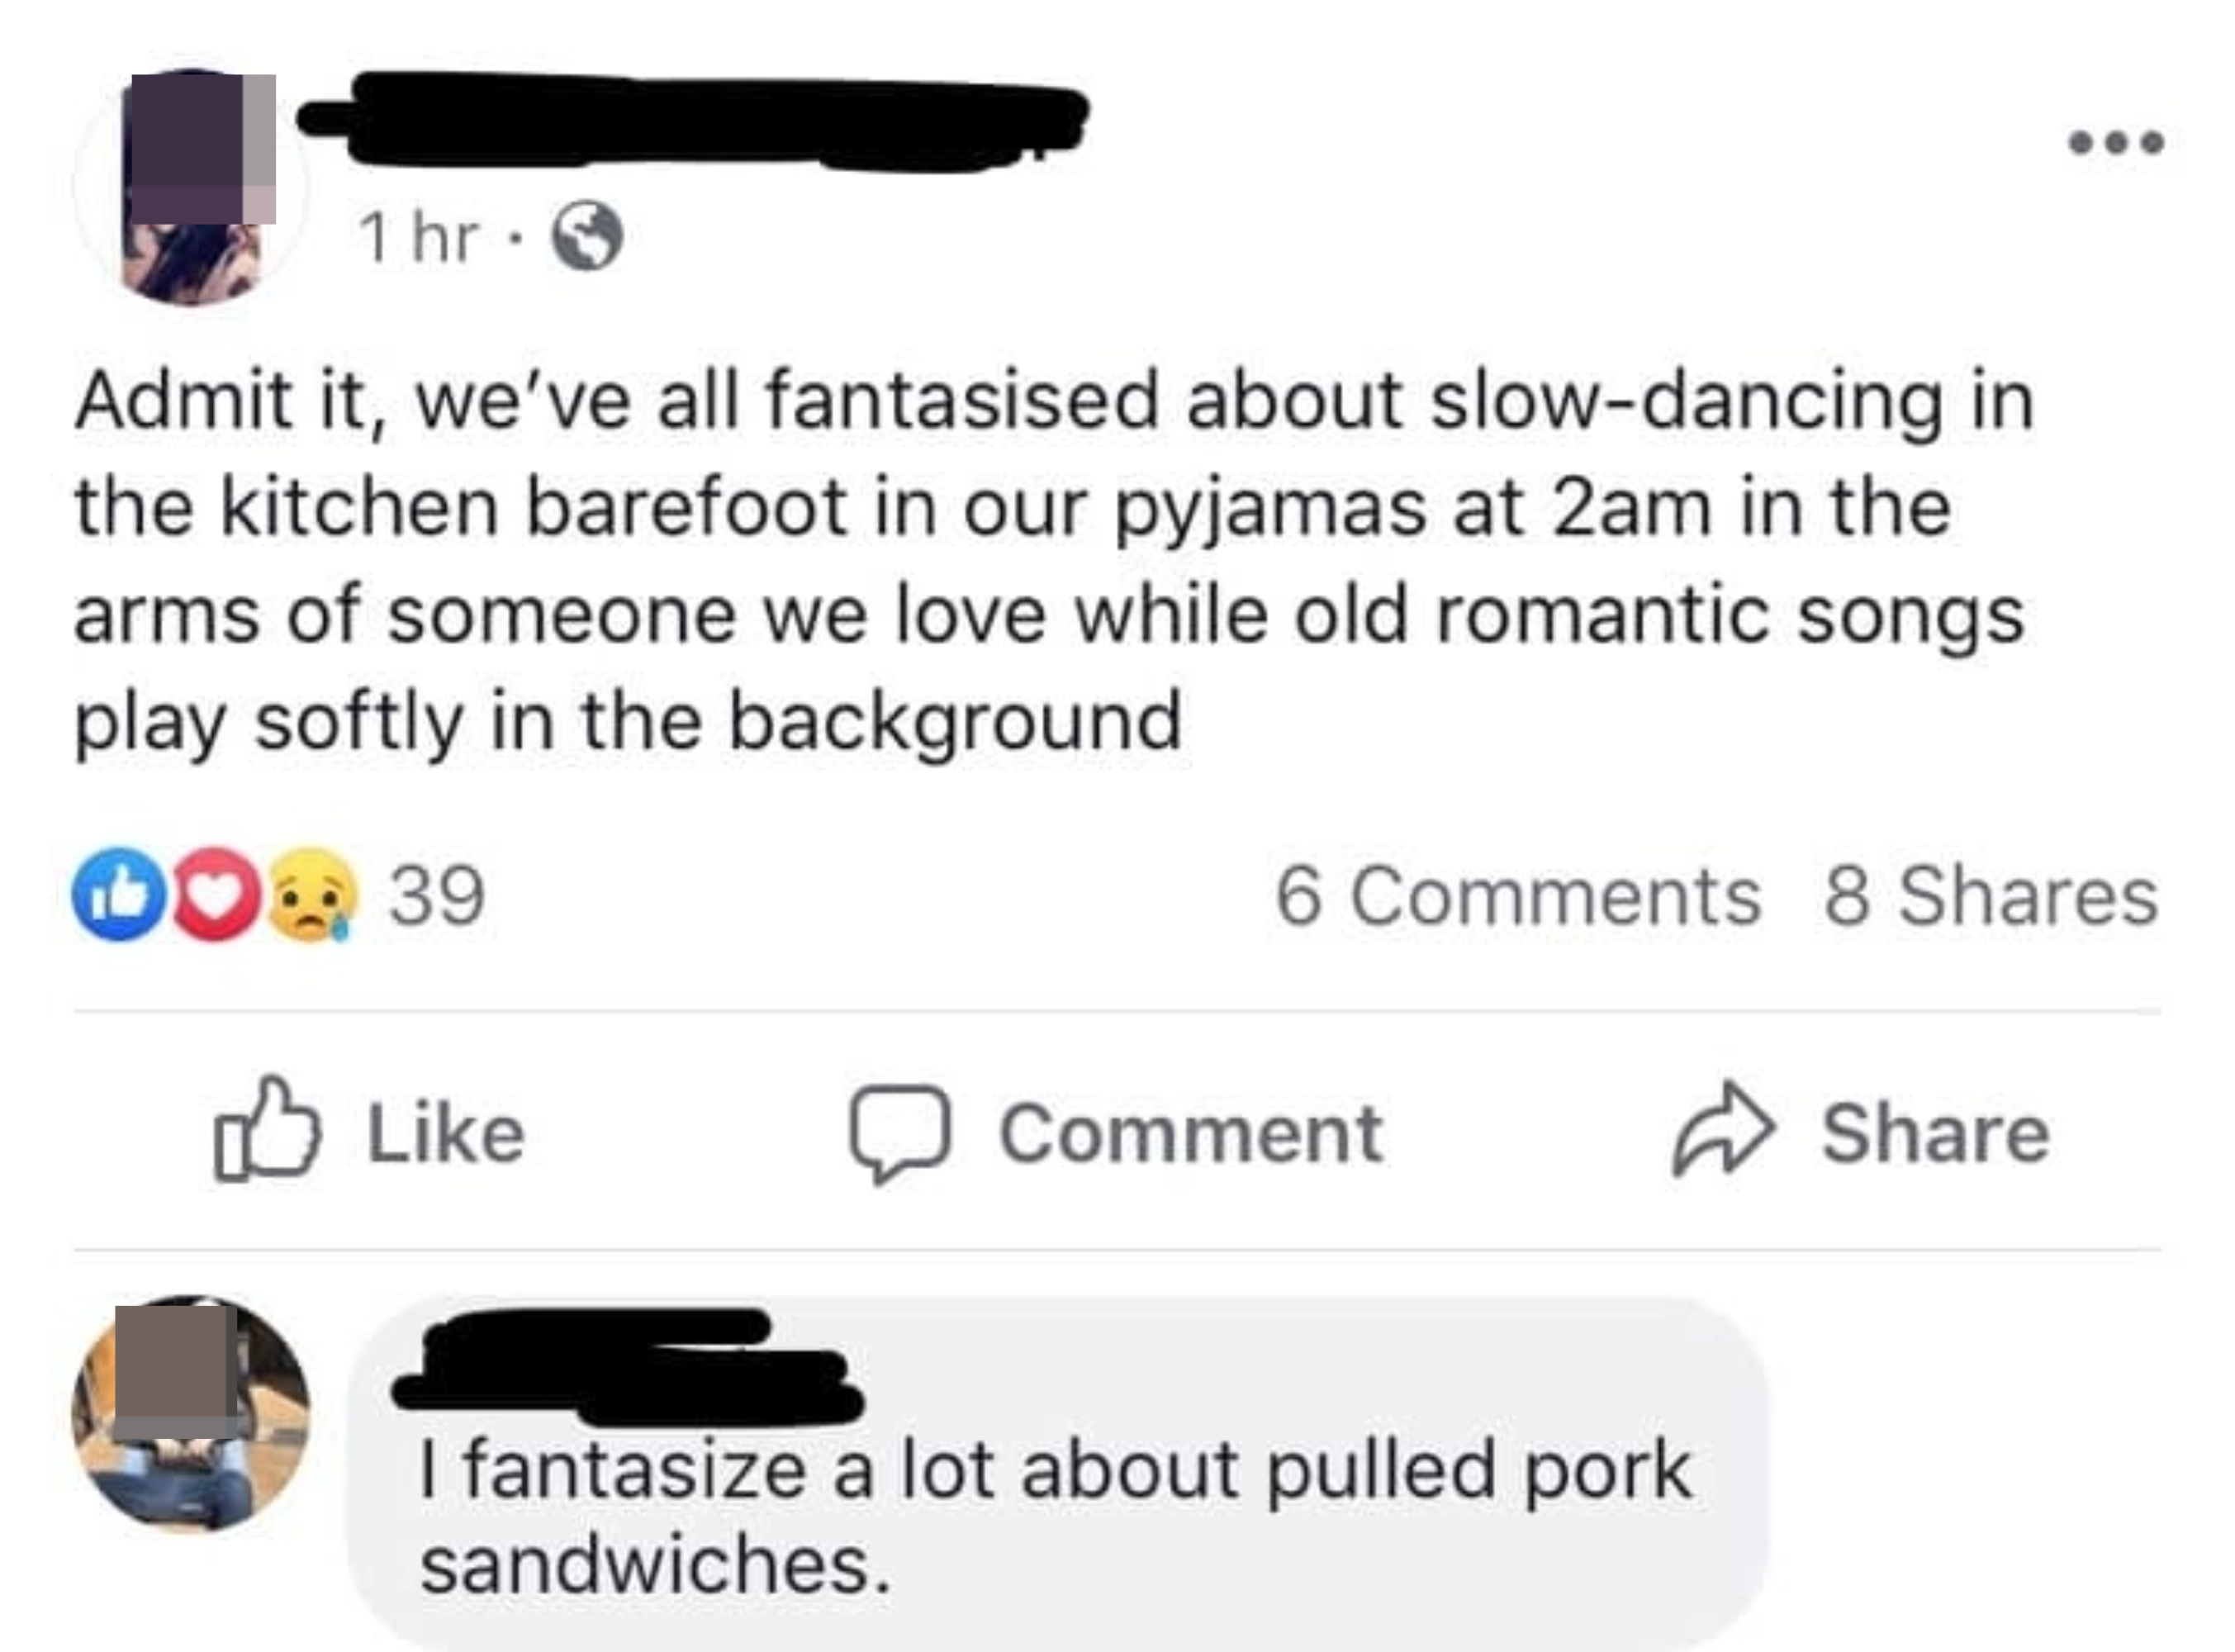 Someone says that we&#x27;ve all fantasized about slow-dancing in the kitchen barefoot in our PJs at 2 am in the arms of someone we love as old romantic music plays, and someone replies that they fantasize a lot about pulled pork sandwiches